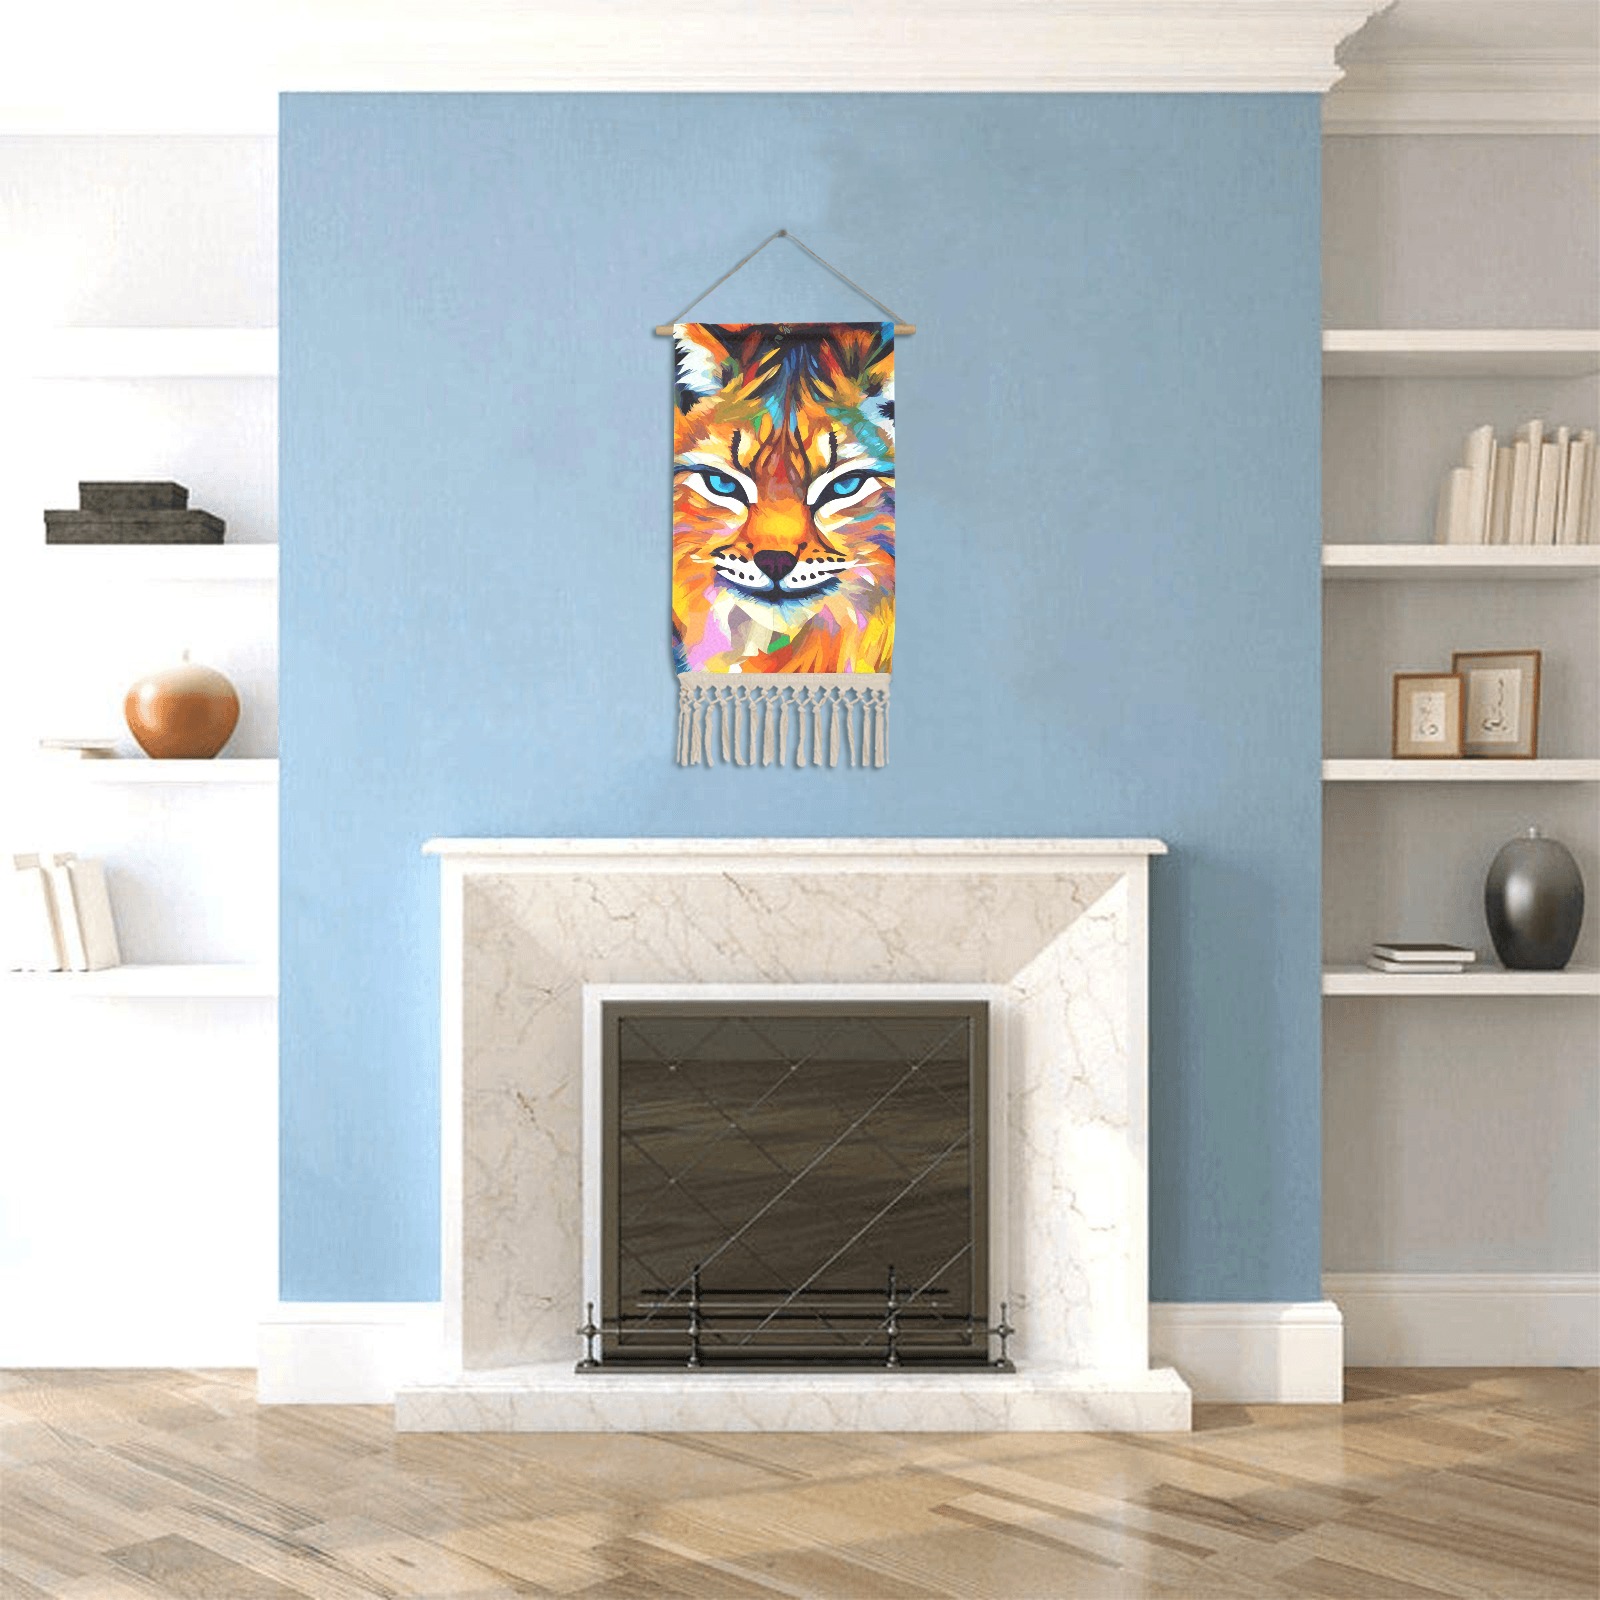 Lynx Funny Colorful Animal Art Linen Hanging Poster